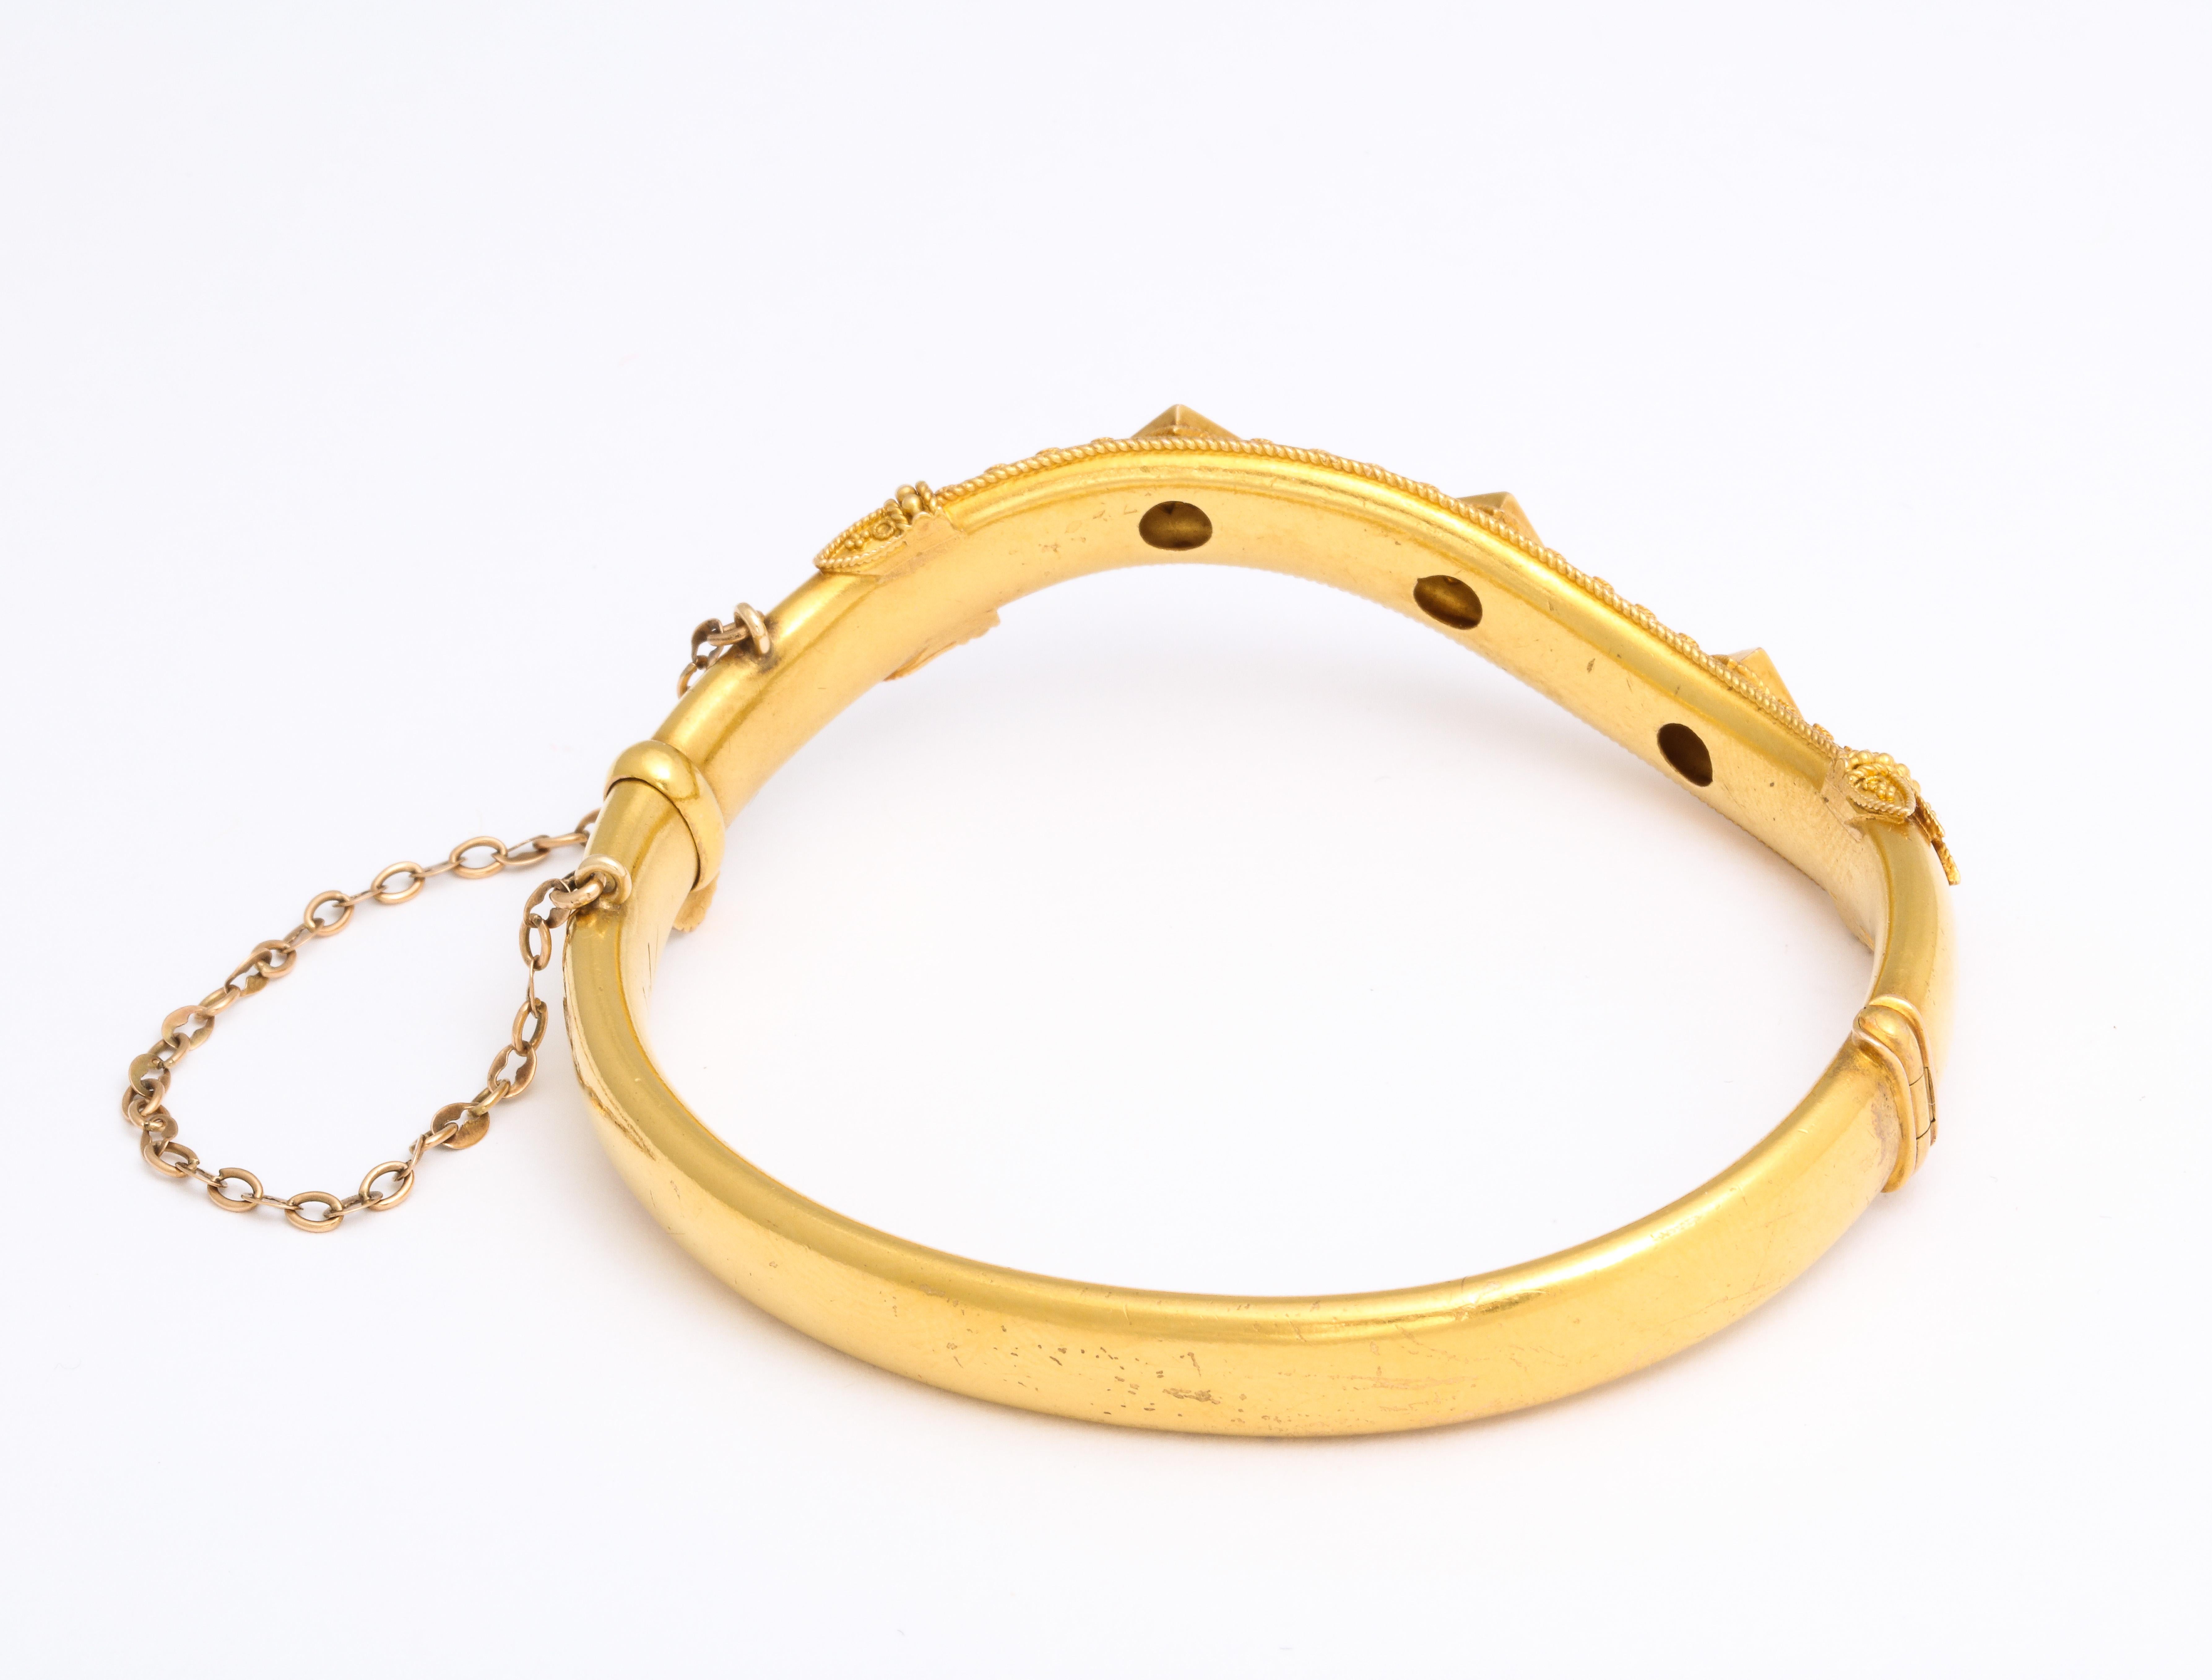 Antique Etruscan Revival Wave Bracelet in 15 Kt Gold In Excellent Condition For Sale In Stamford, CT